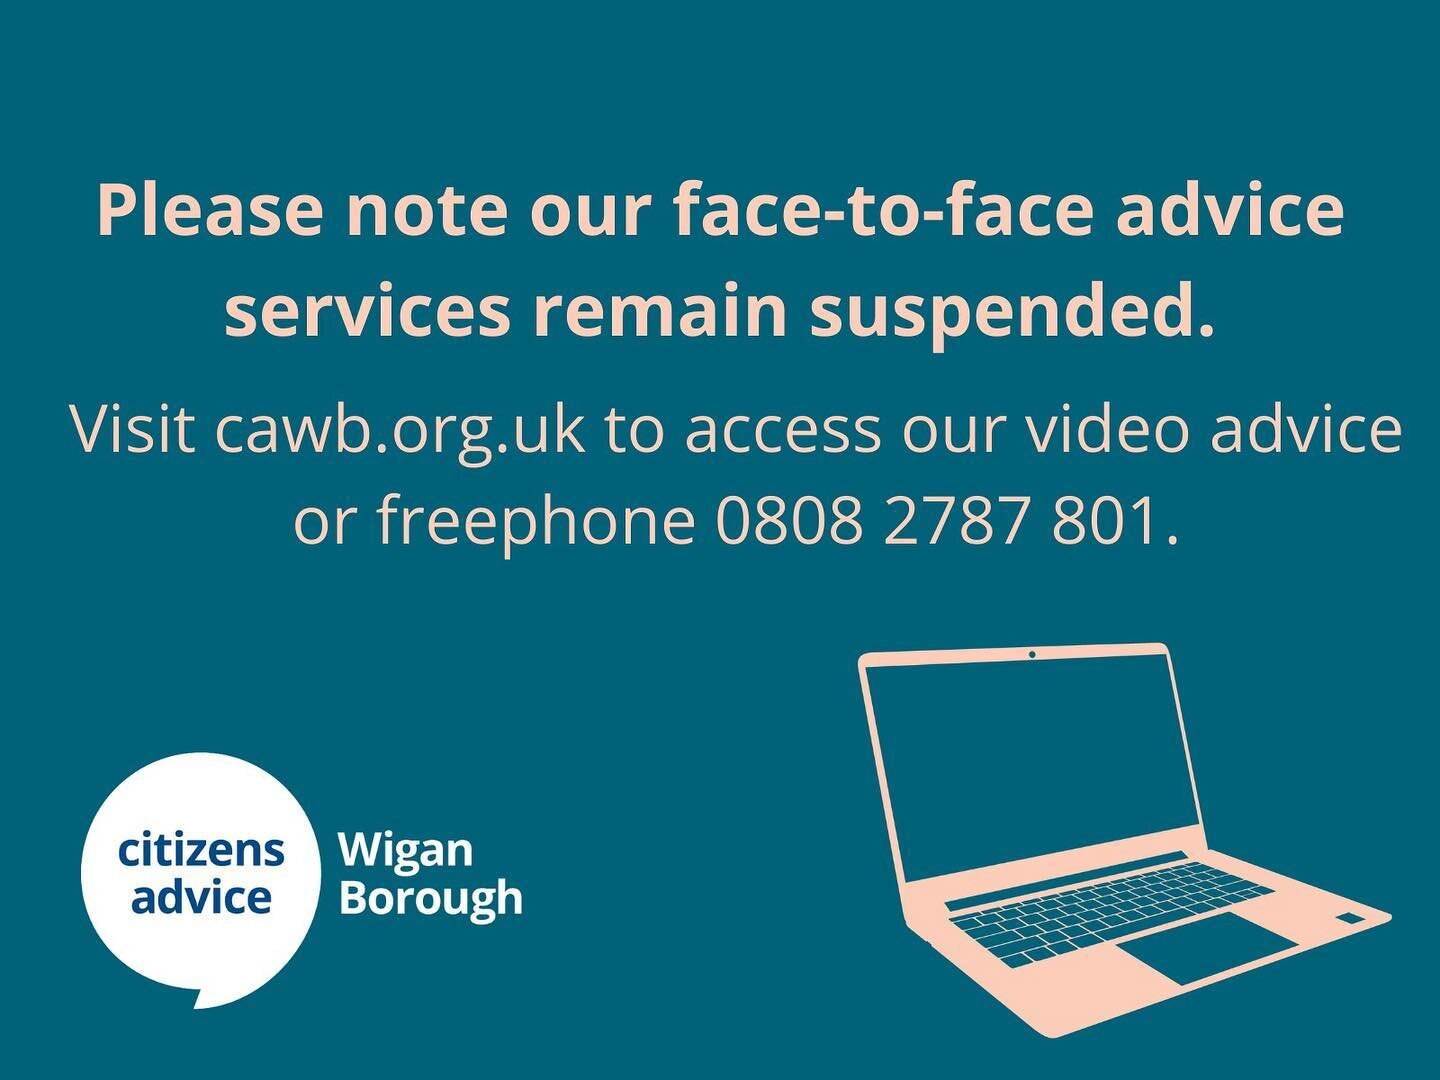 ⚠️Please note our in person services remain suspended for the time being.

If you need advice you can still access our free video platform or freephone 0808 2787 801.

#wigan #leigh #advice #charity #freedomday #covid19 #heretohelp #citizensadvice